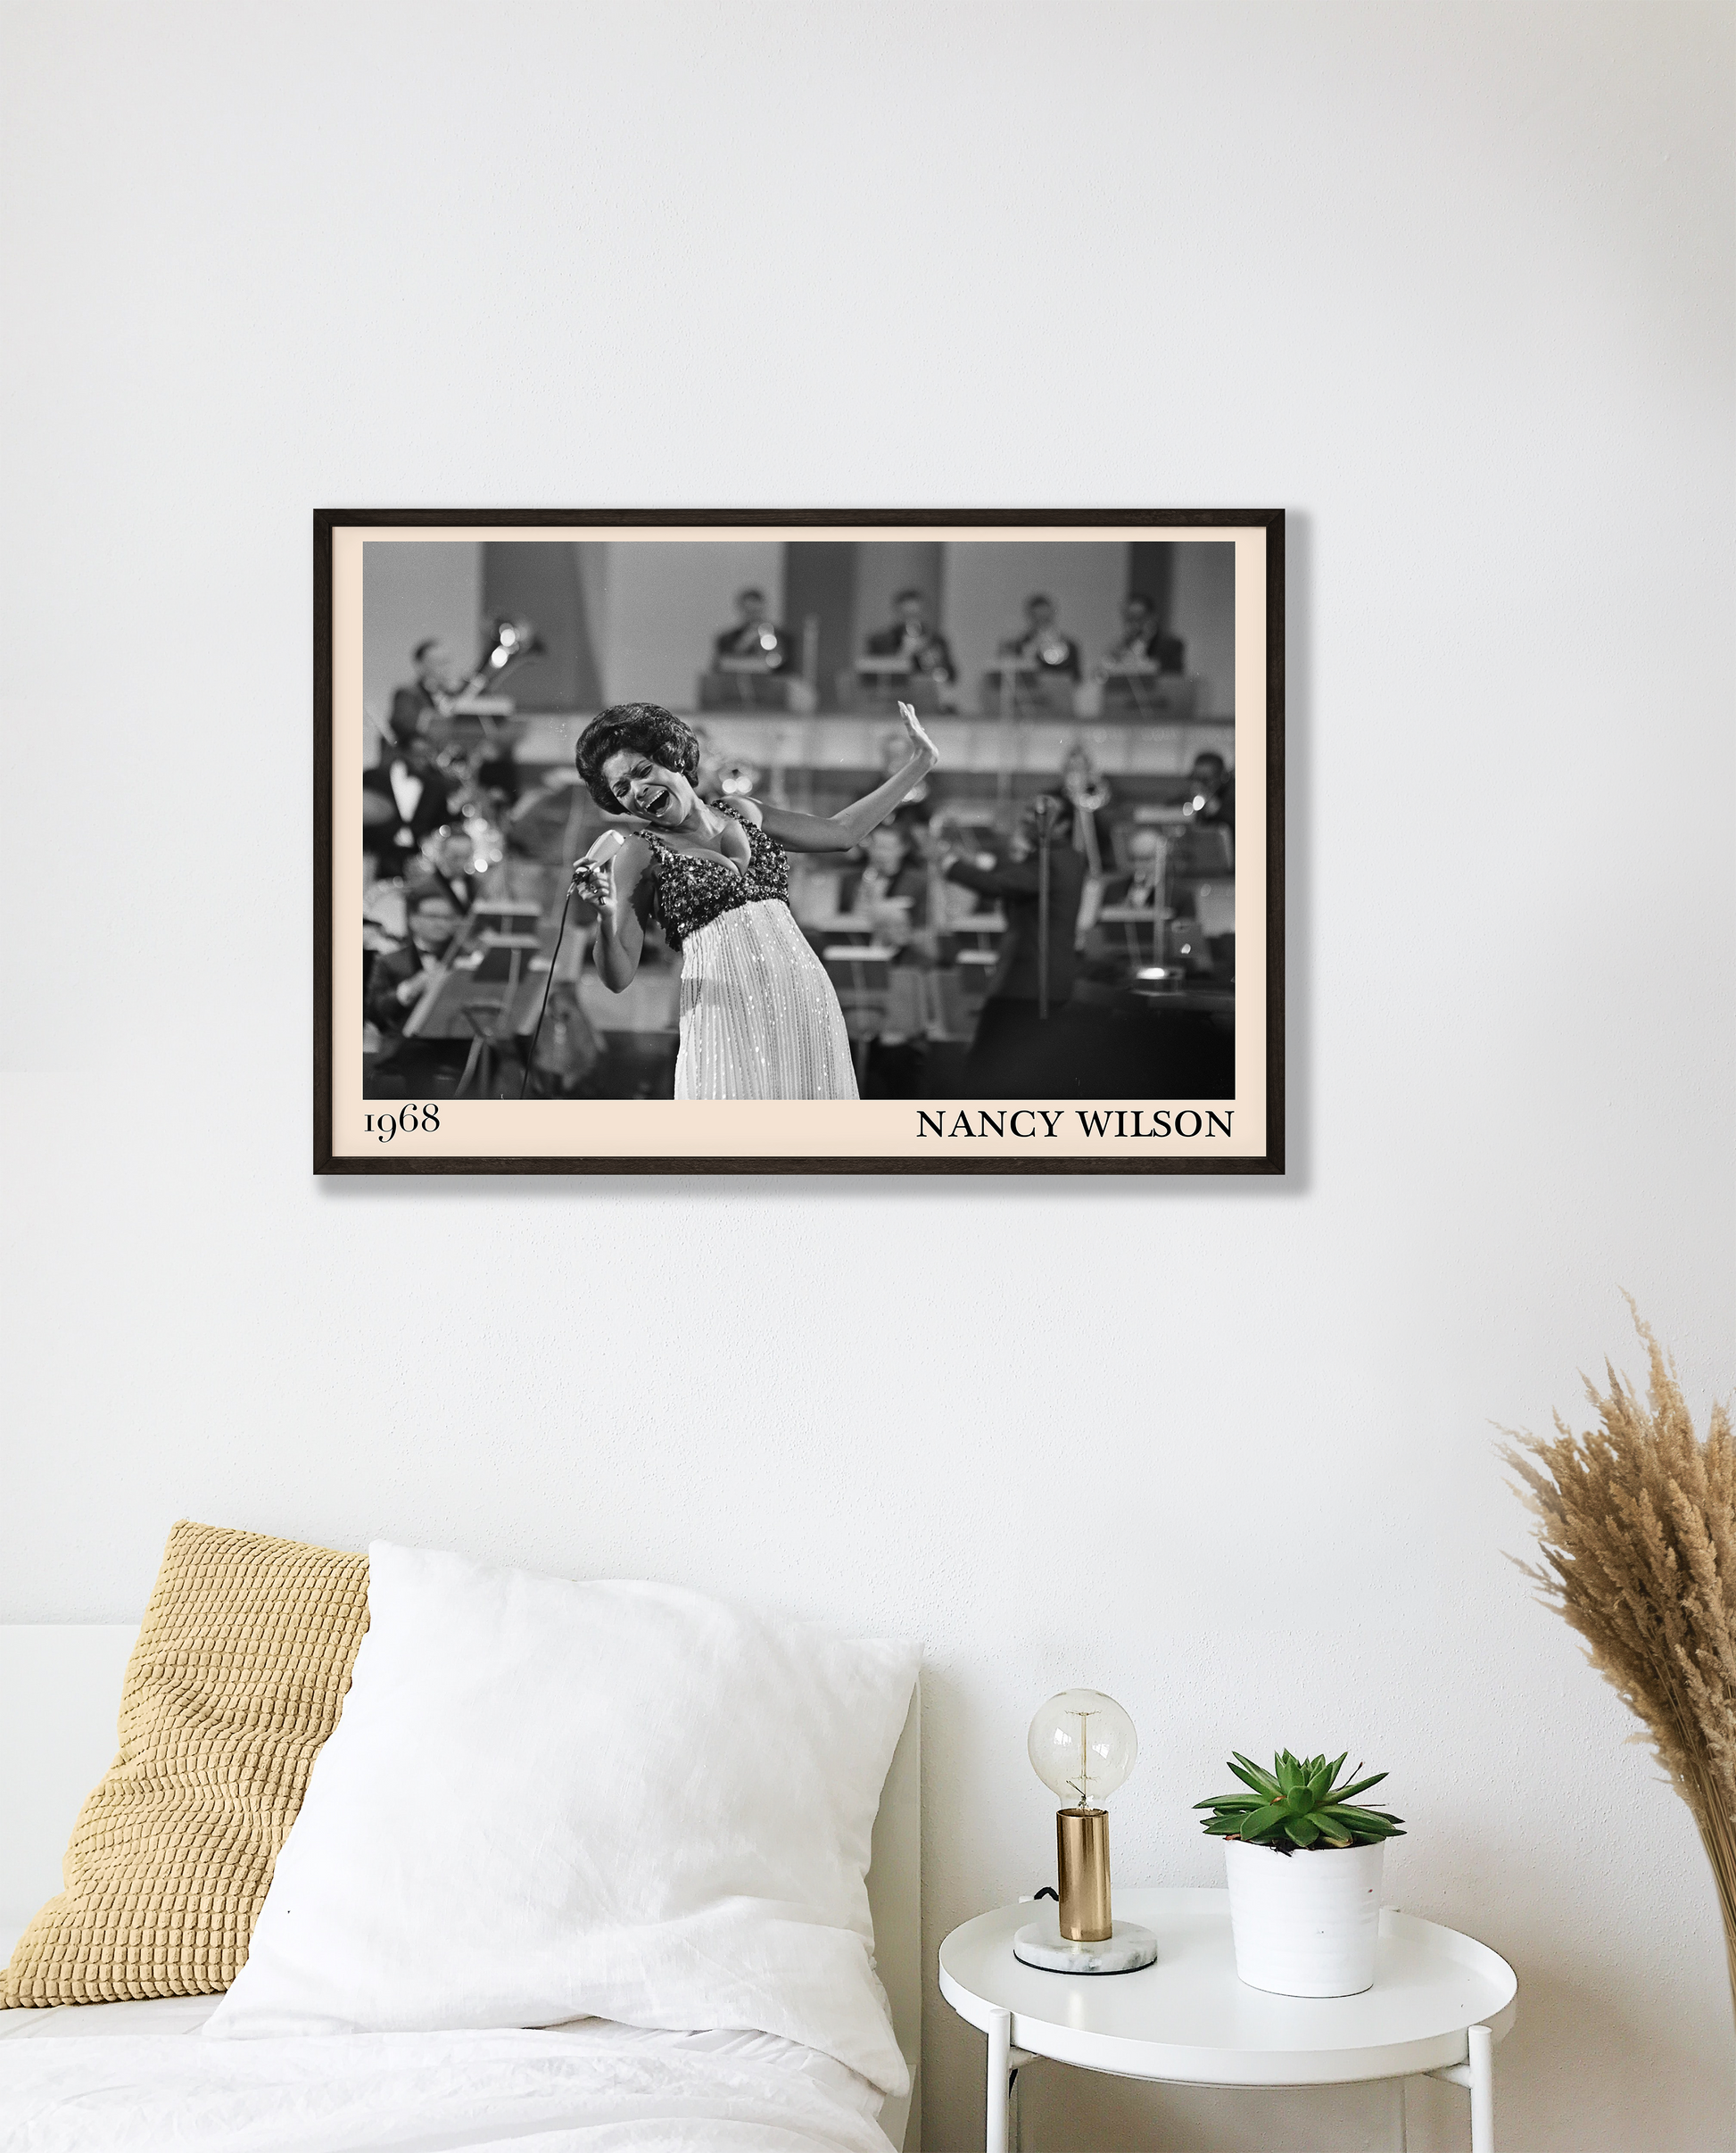 1968 picture of Nancy Wilson singing. Picture crafted into a cool black framed music poster, with an off-white border. Poster is hanging on a white bedroom wall